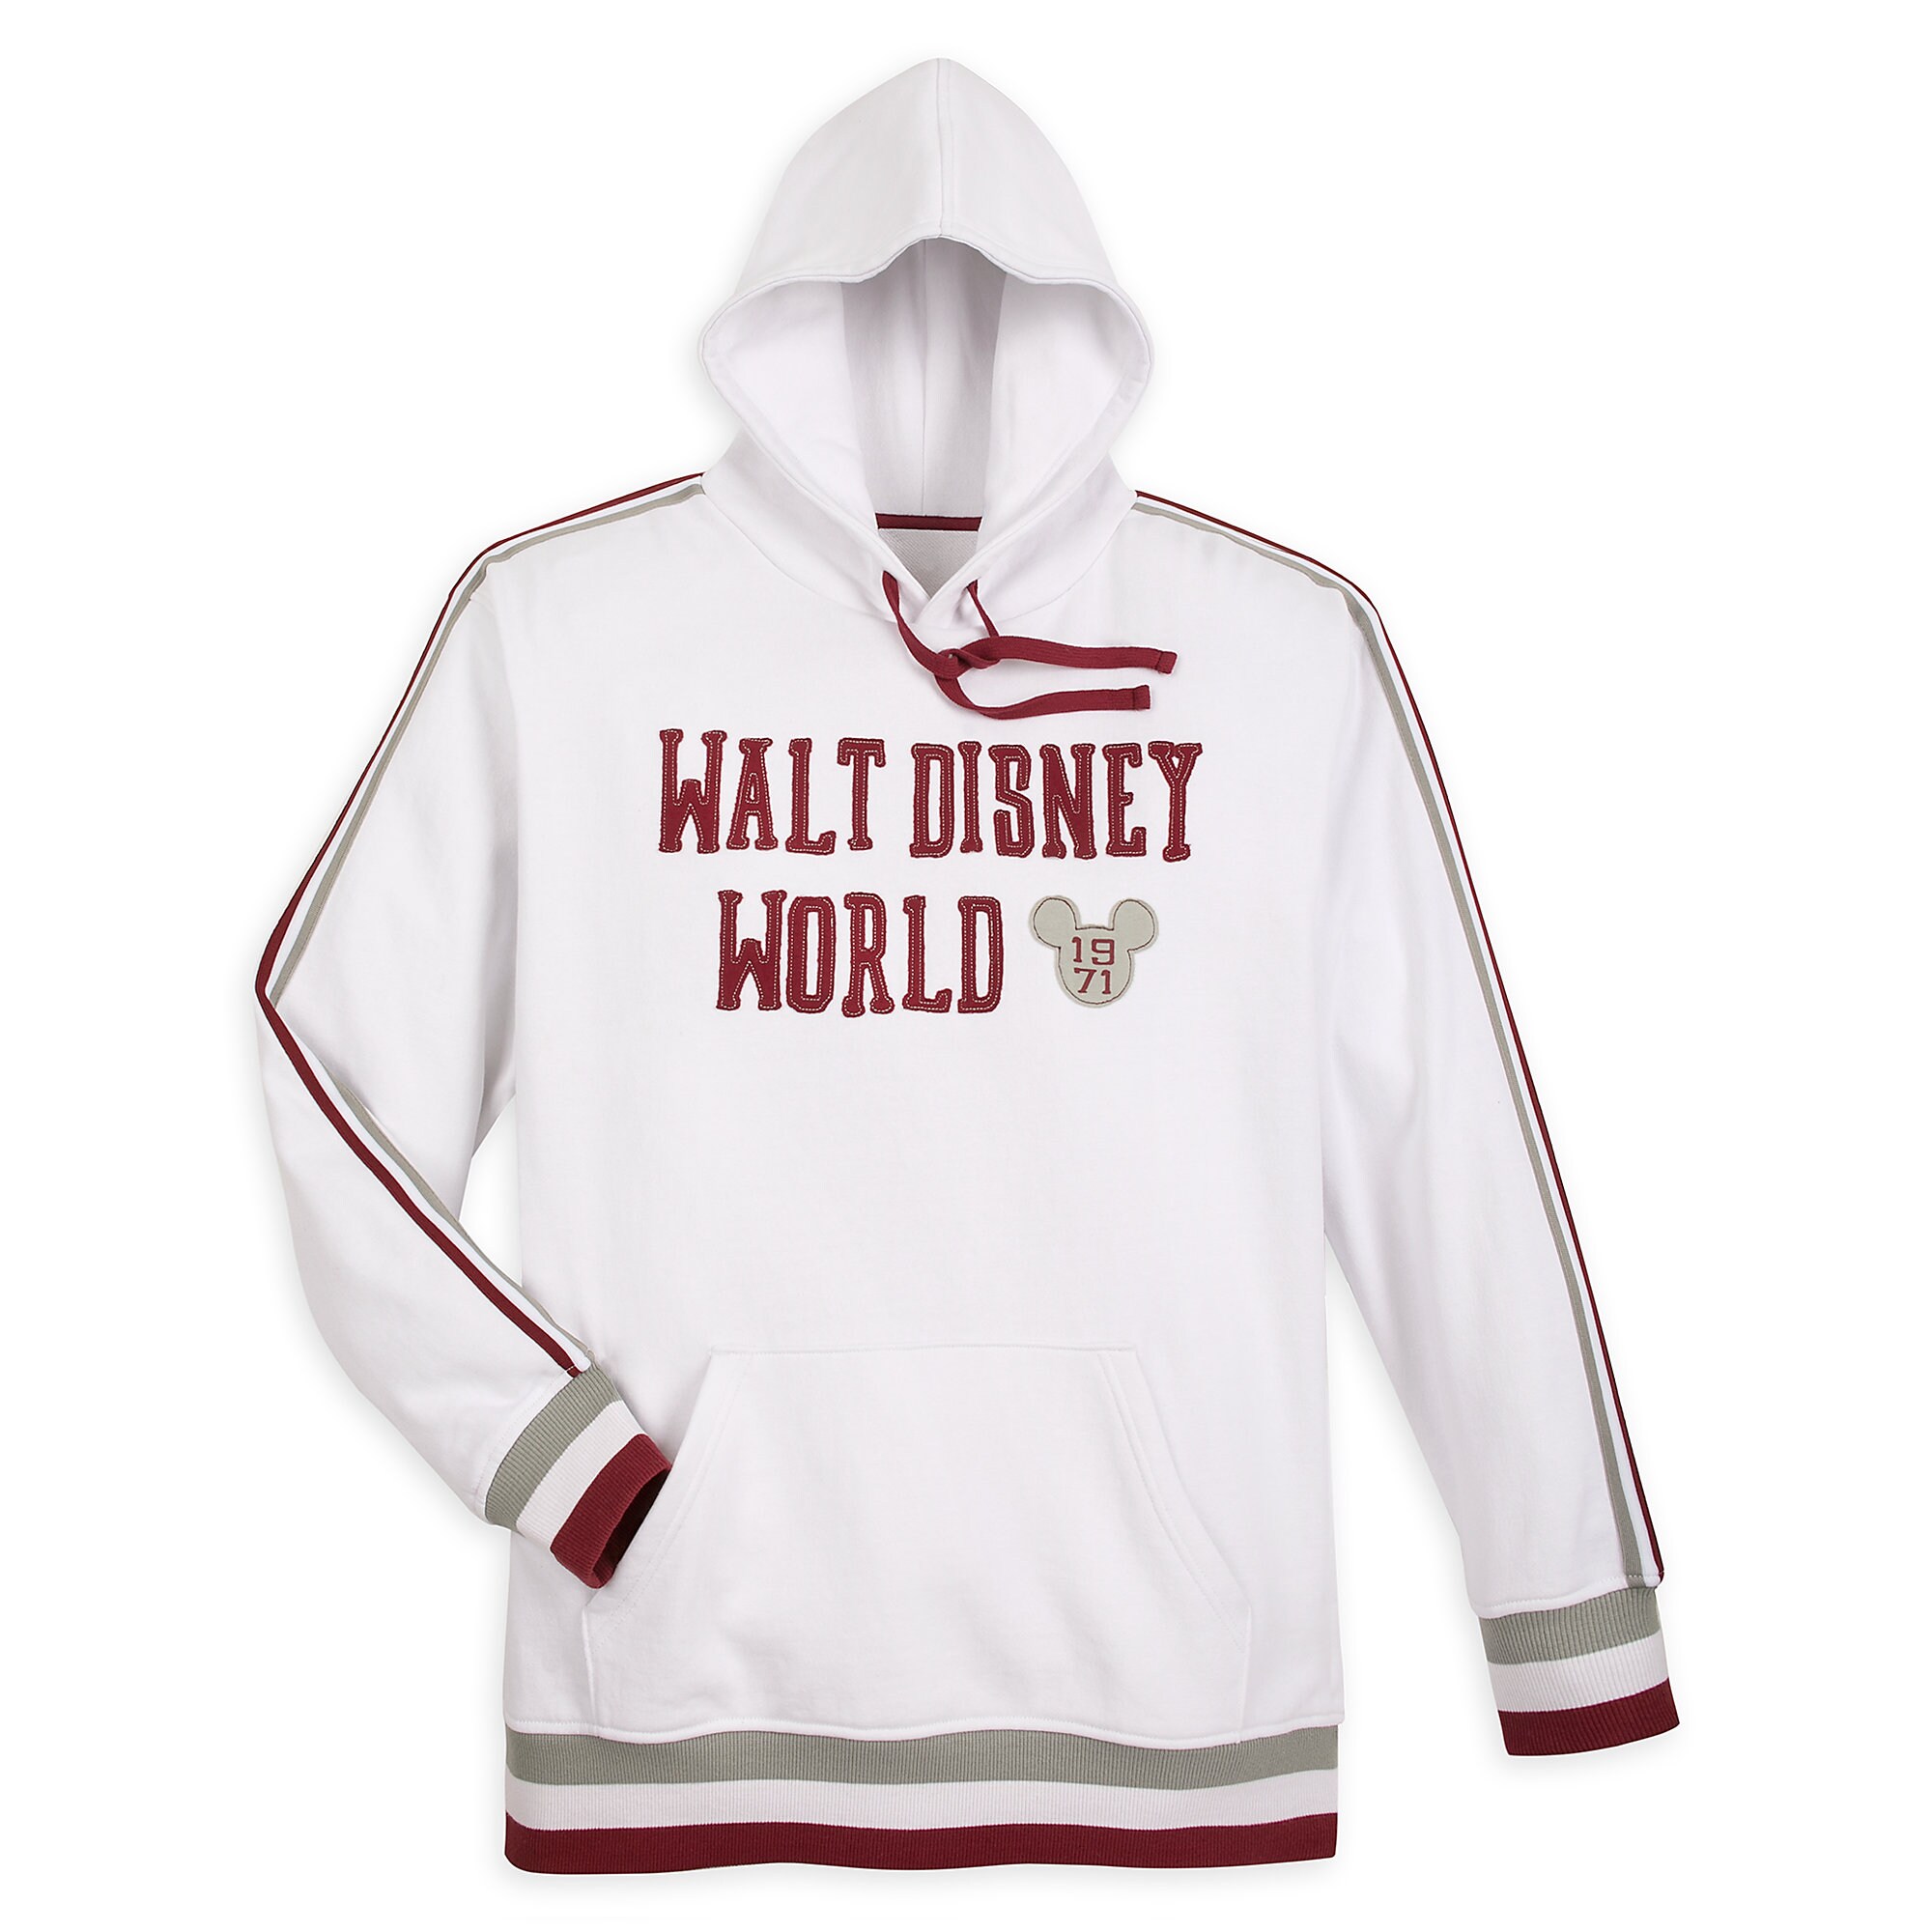 Walt Disney World Pullover Hoodie for Men now out for